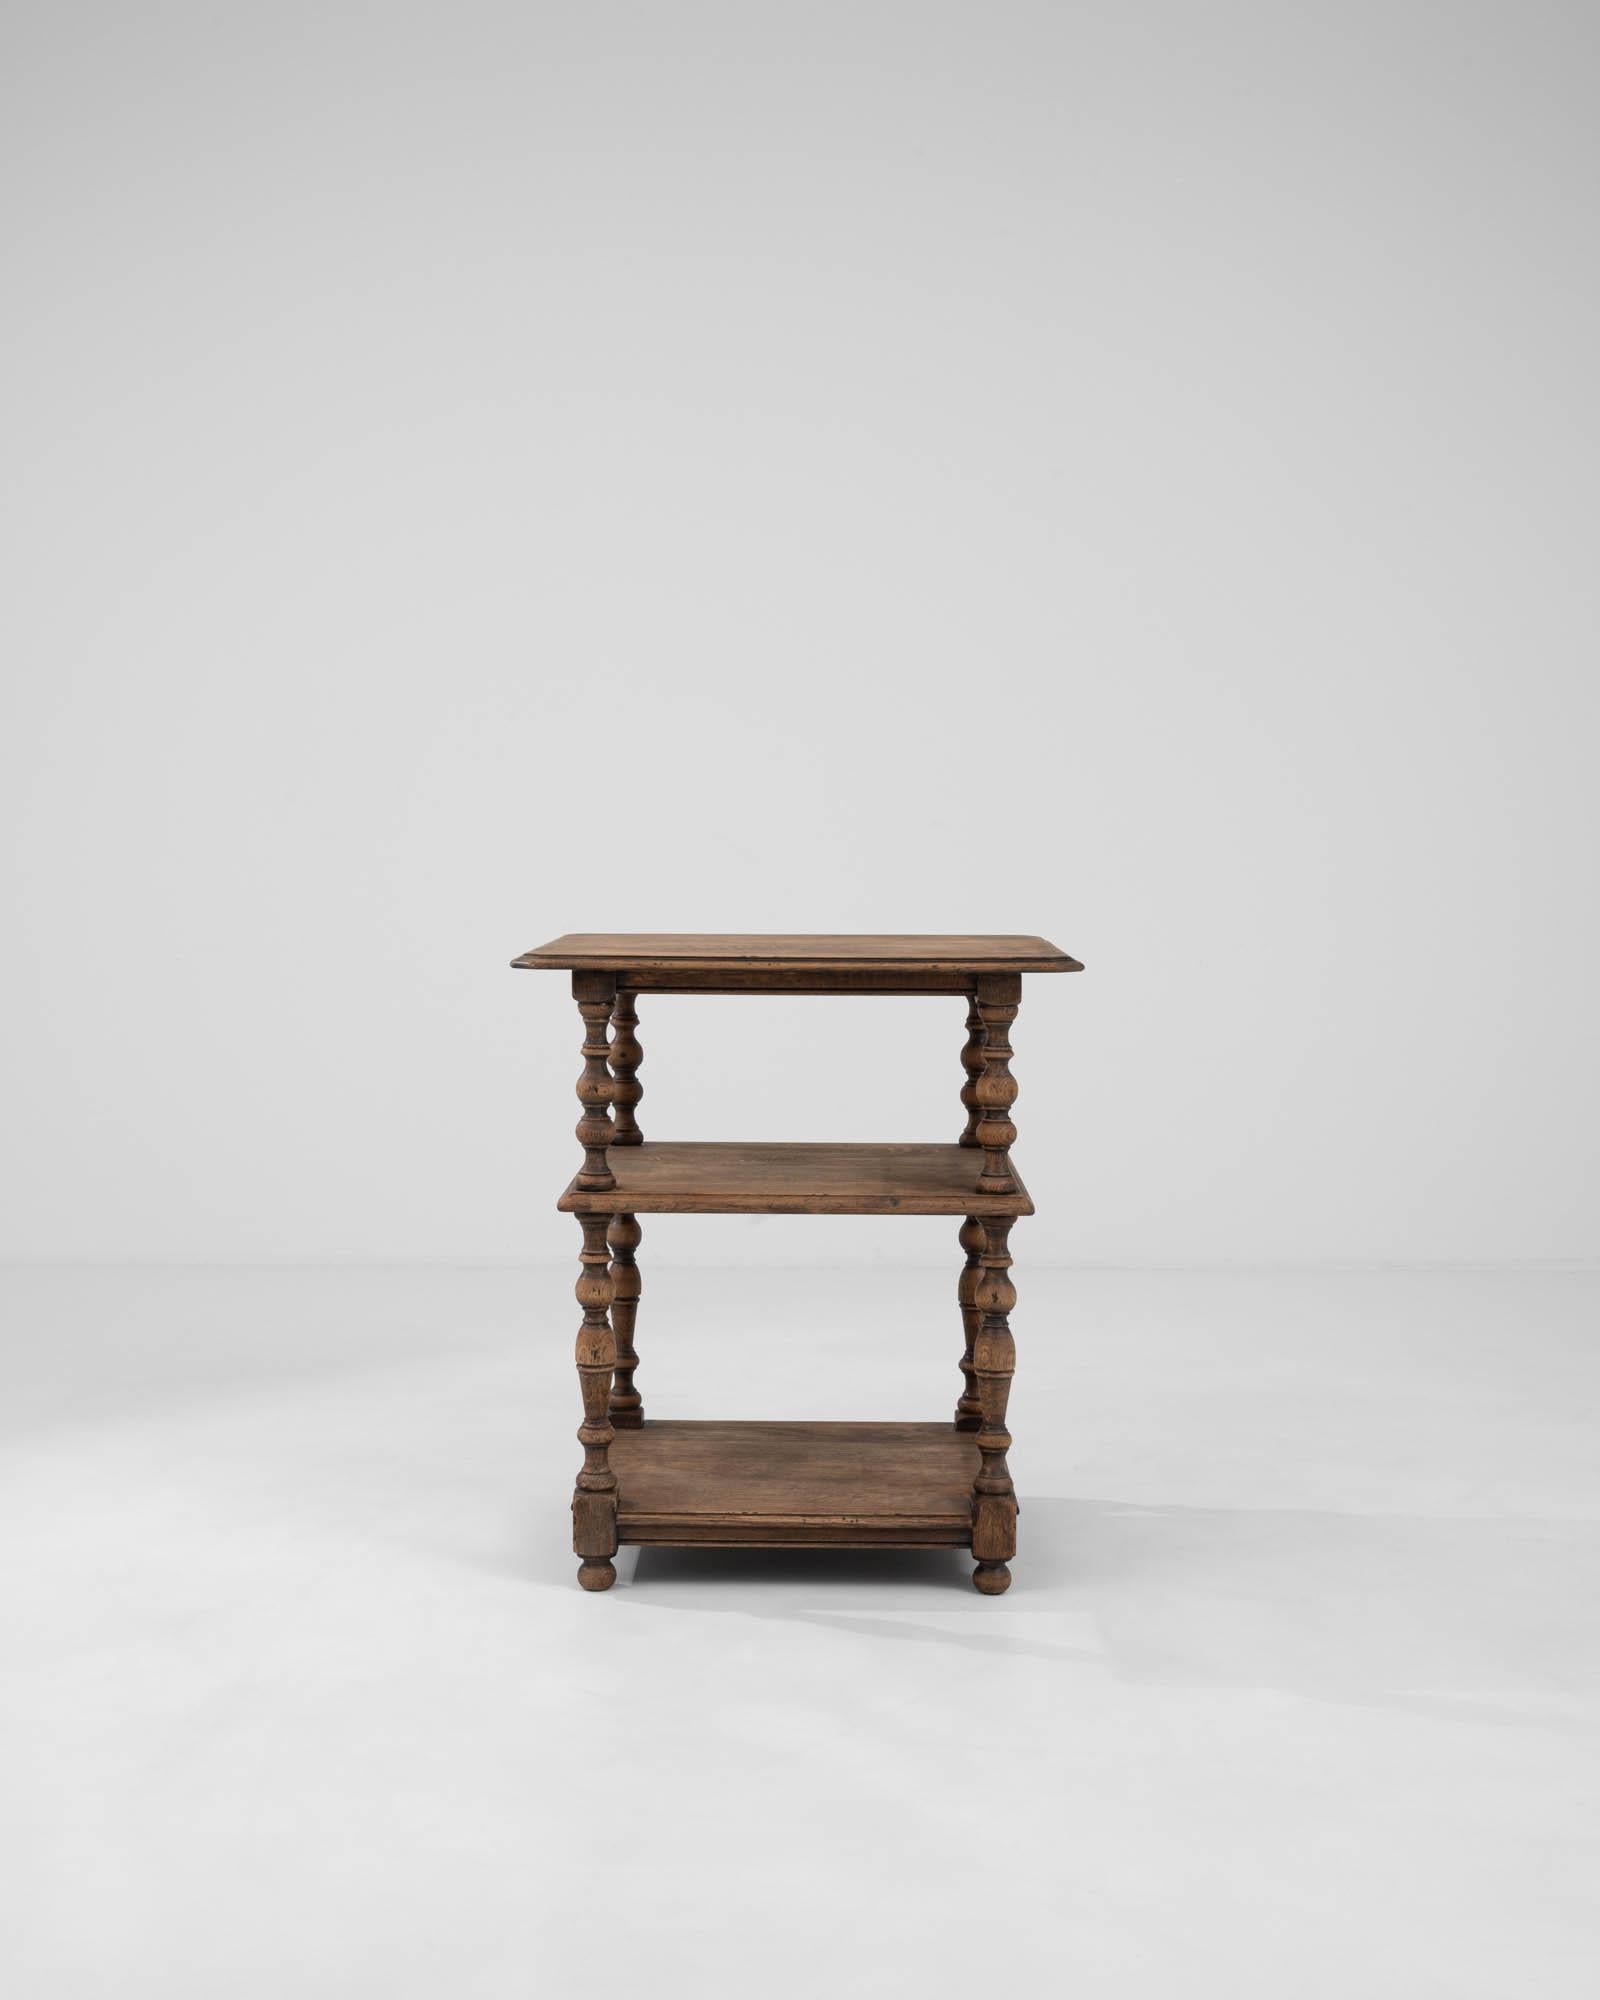 Step back in time with this charming 1900s French wooden side table, a piece that epitomizes the grace and functionality of early twentieth-century craftsmanship. This delightful table boasts a trio of tiers, each connected by elegantly turned